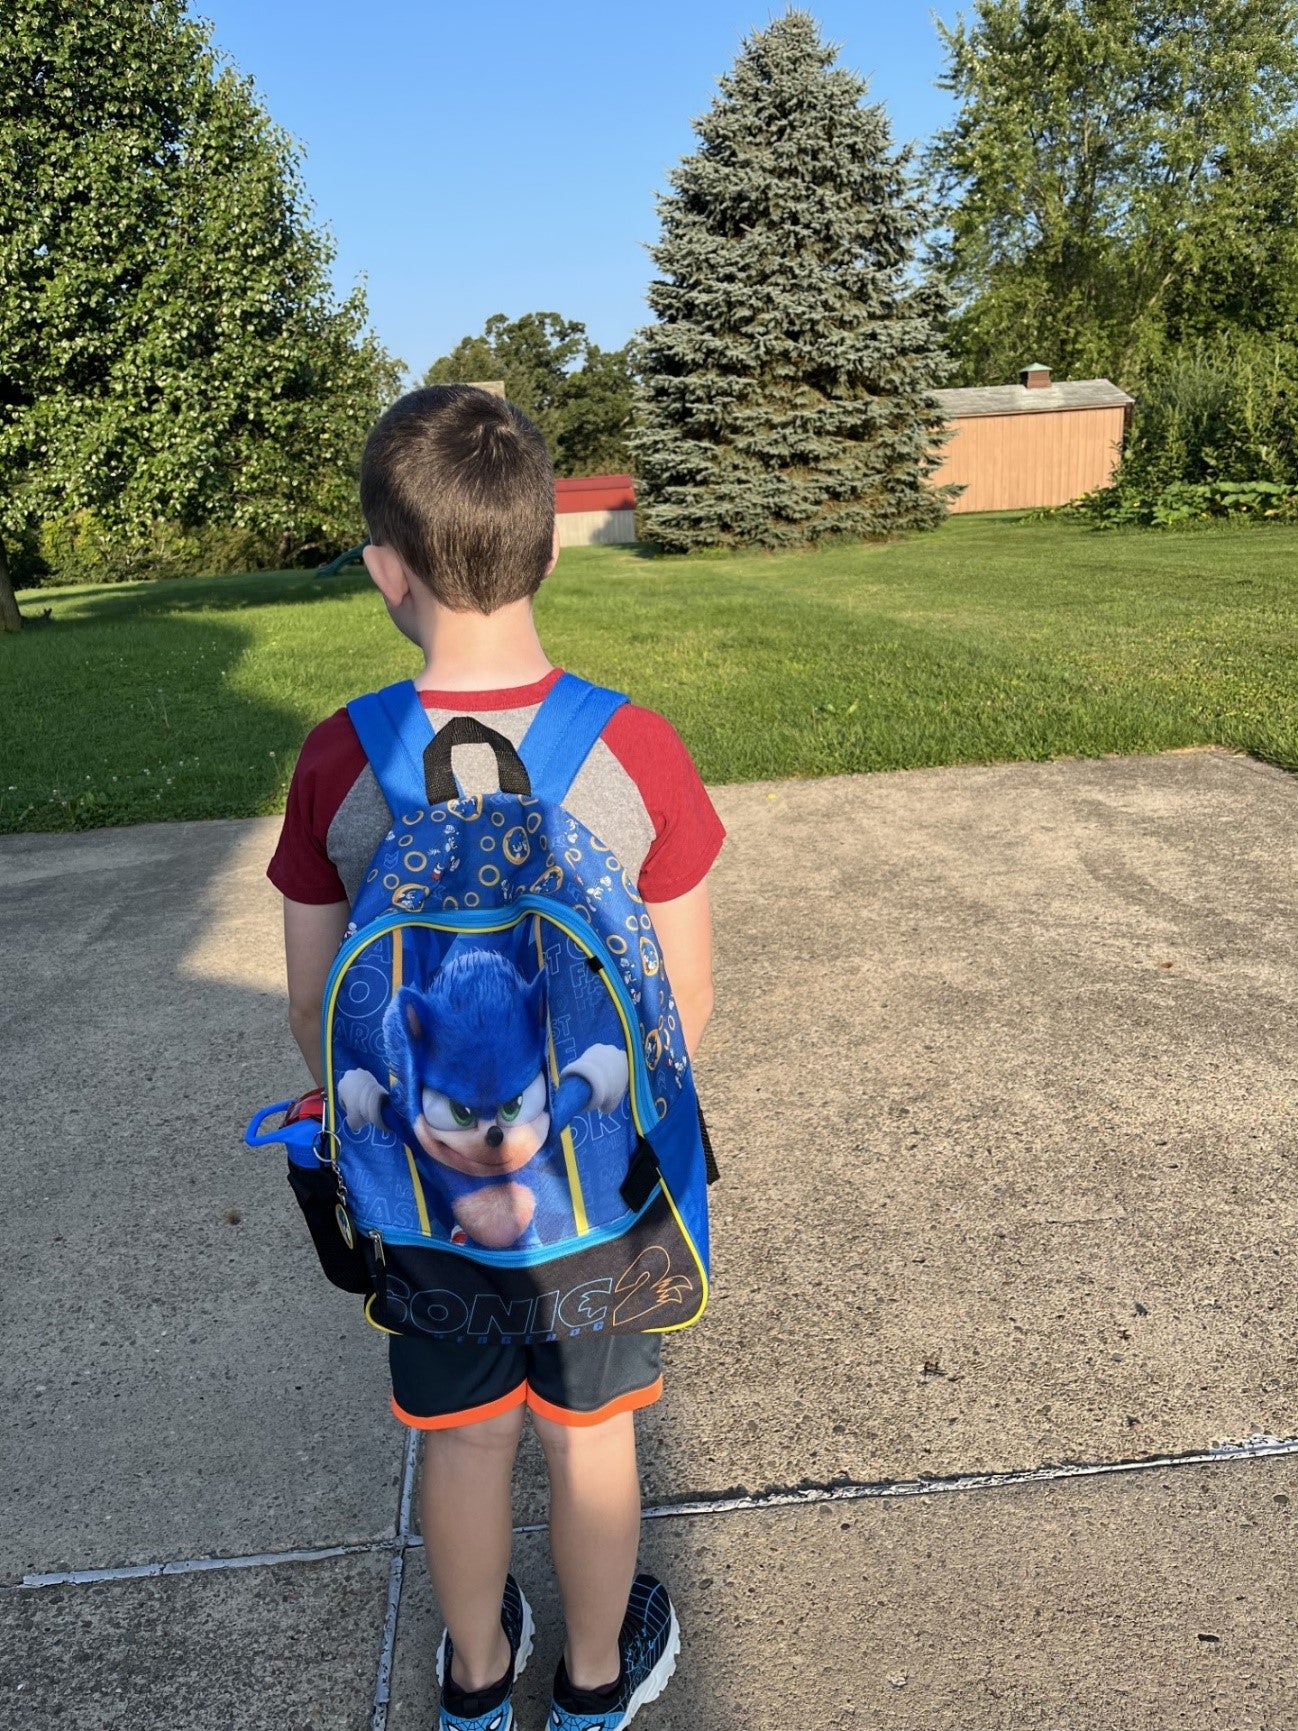 My day starts off early getting two little guys ready and off to school and daycare. This was my oldest son’s fourth day of second grade and my youngest is in daycare